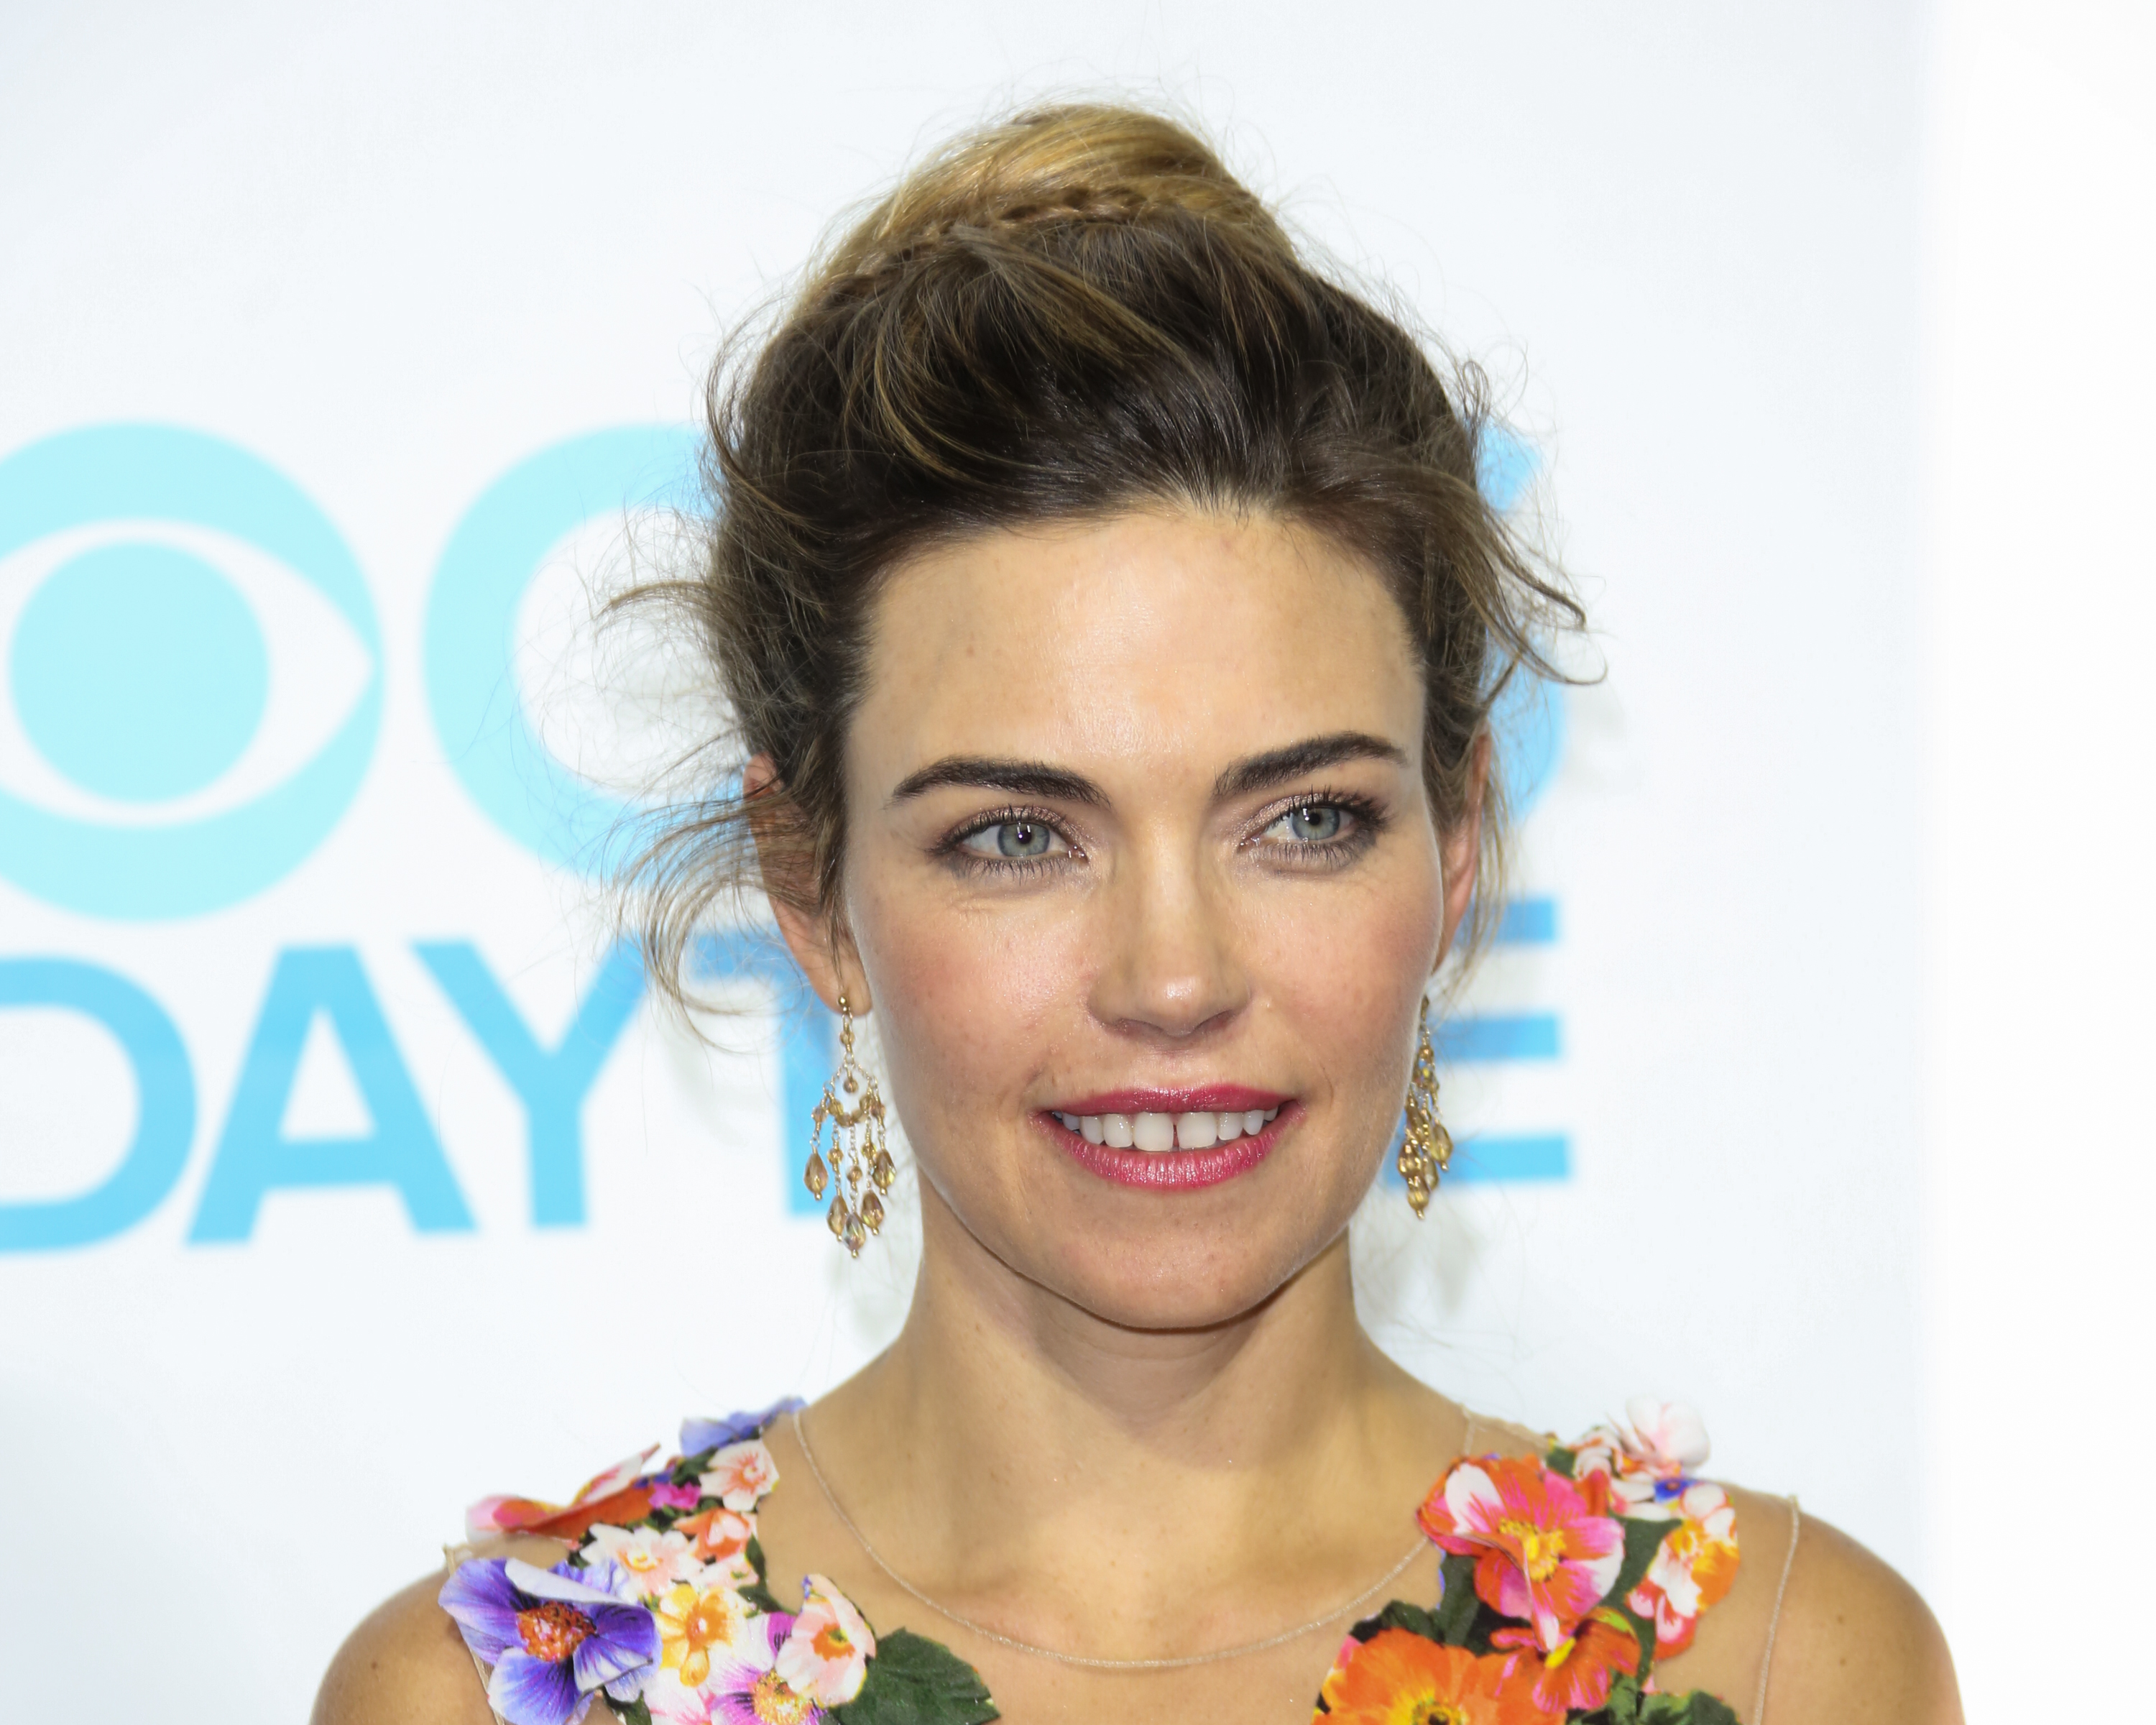 'The Young and the Restless' actor Amelia Heinle wearing an orange floral dress, and her hair in an updo.